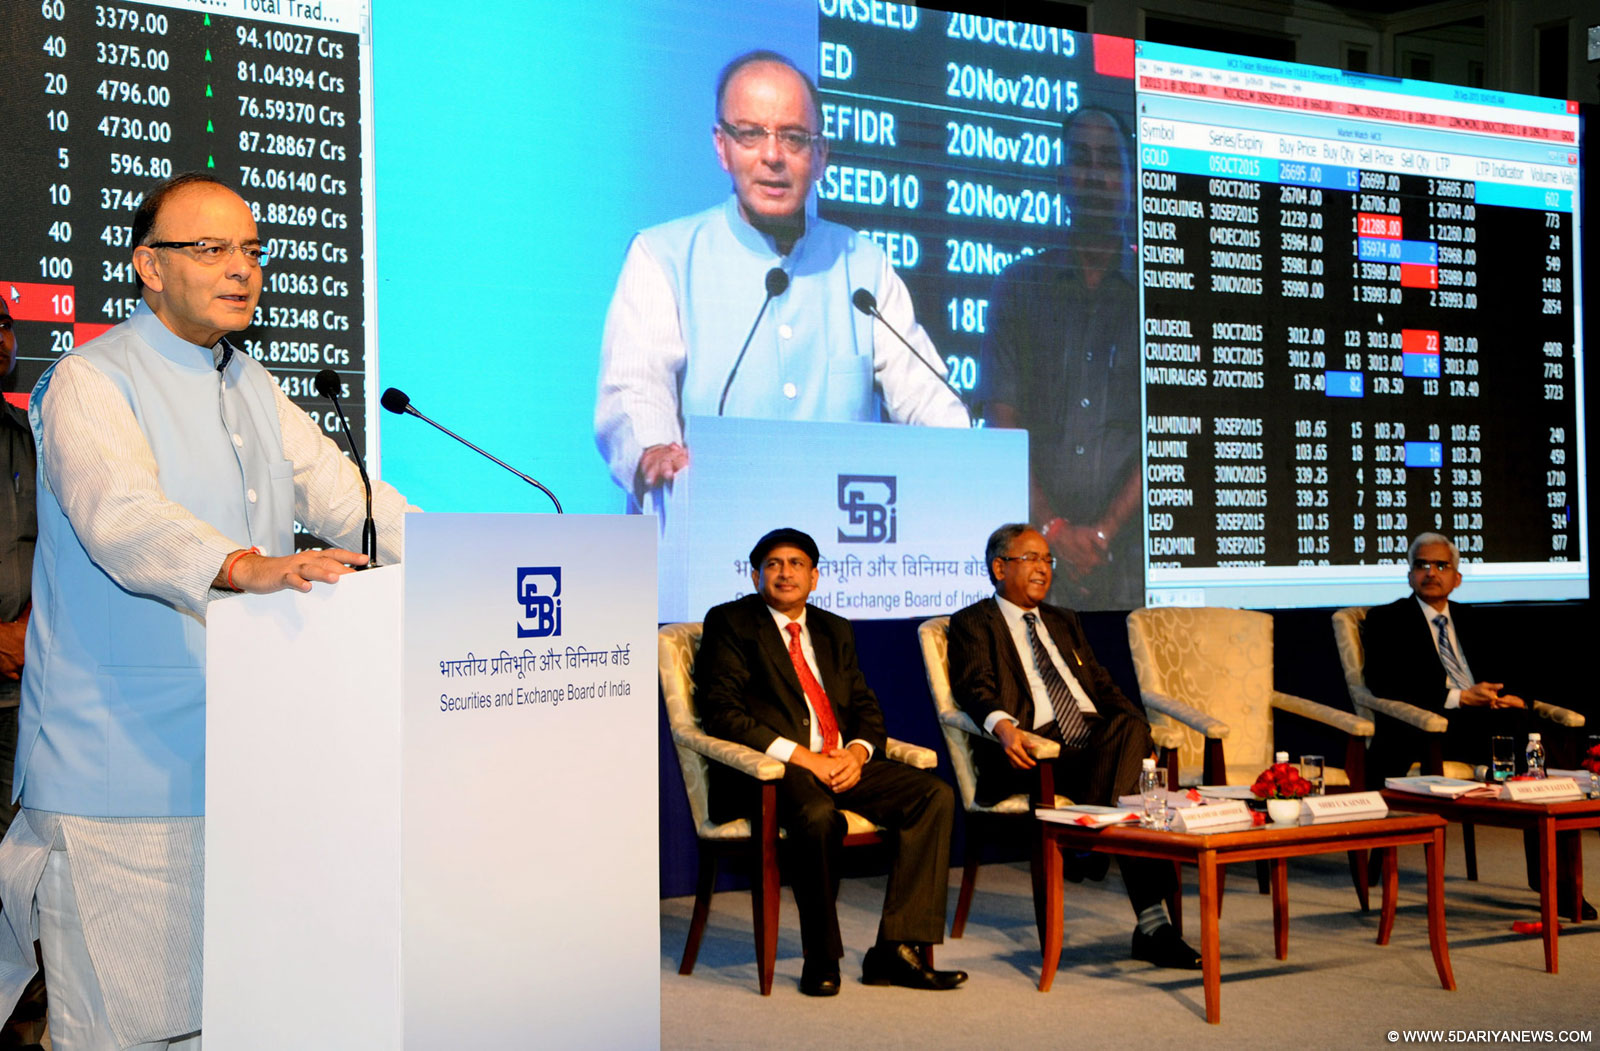 The Union Minister for Finance, Corporate Affairs and Information & Broadcasting, Shri Arun Jaitley addressing at a function to mark the merger of Forward Markets Commission with Securities & Exchange Board of India (SEBI), in Mumbai on September 28, 2015. The Secretary, Department of Economic Affairs, Ministry of Finance, Shri Shaktikanta Das and other dignitaries are also seen.